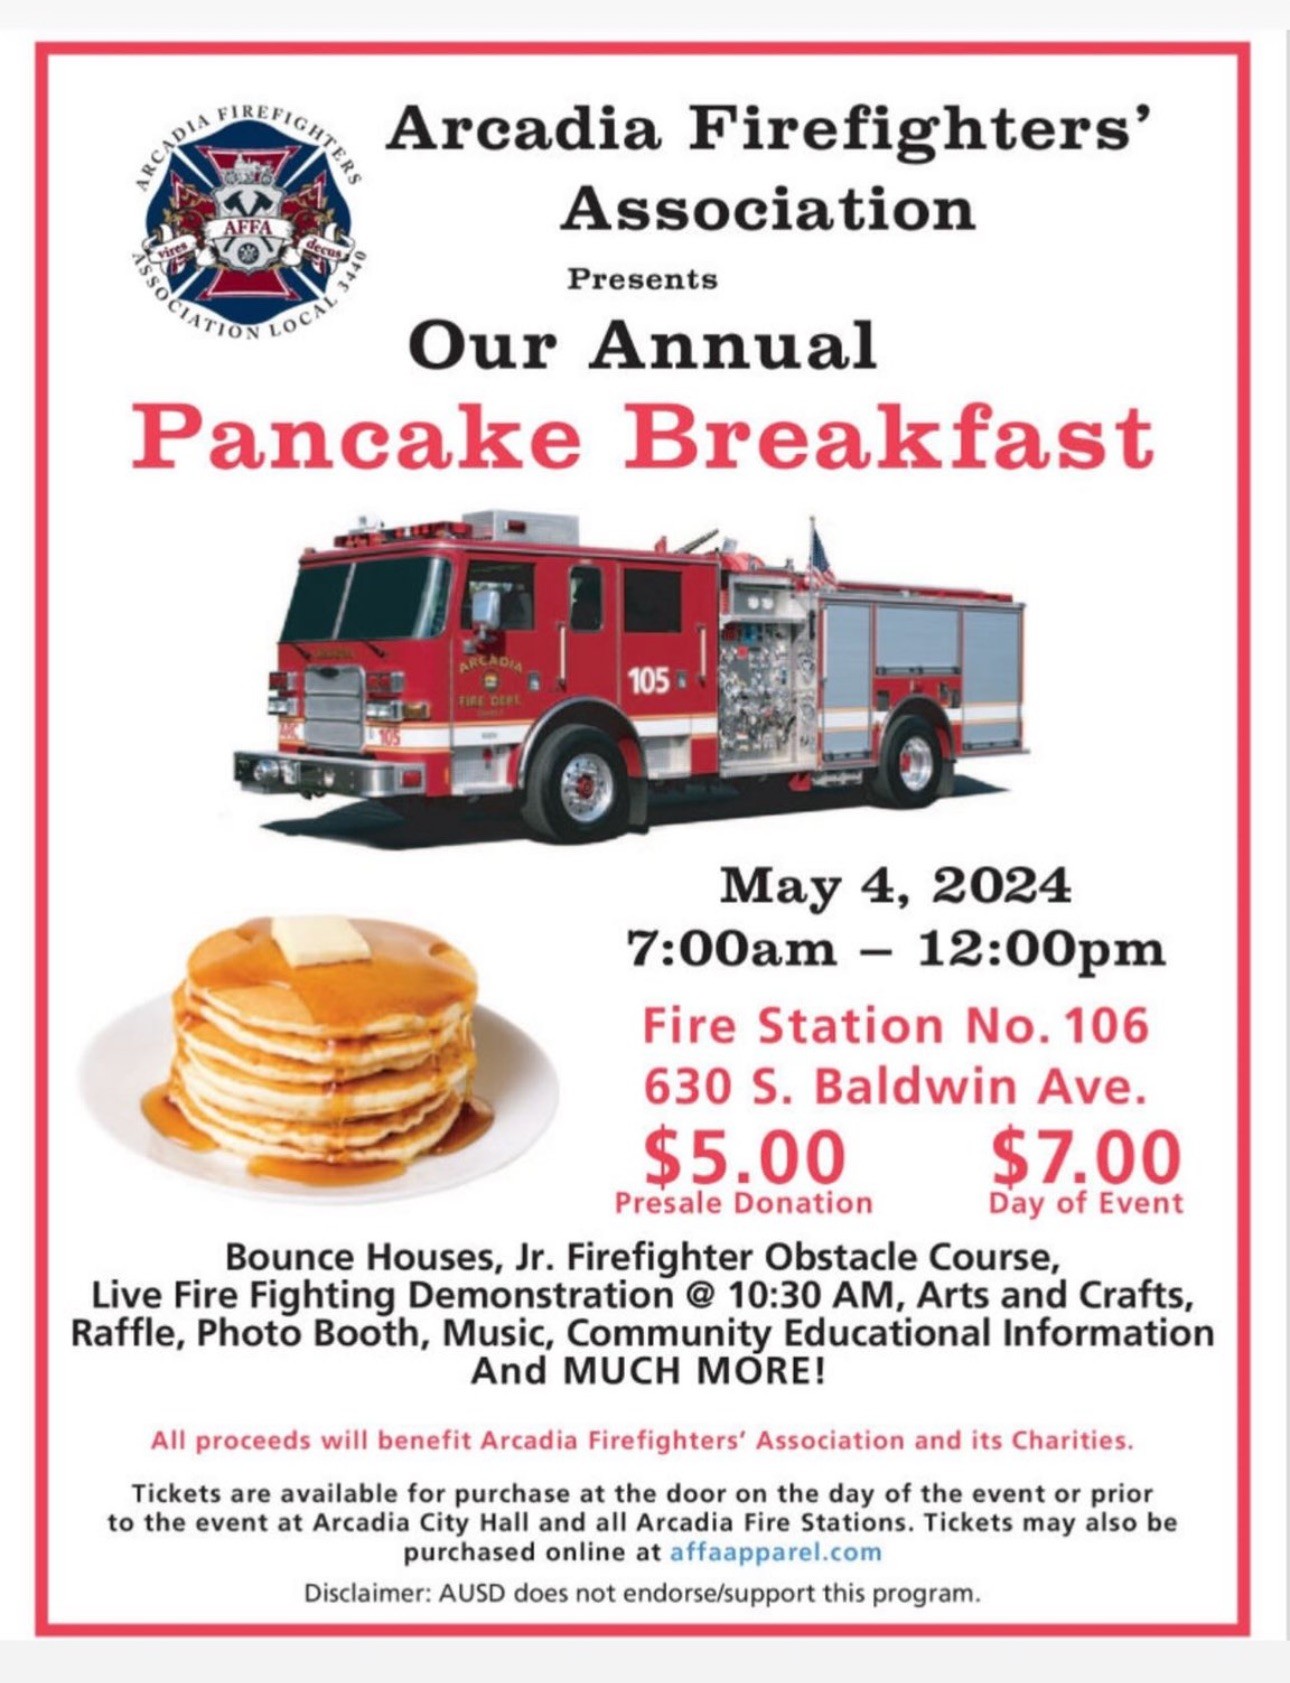 Arcadia Firefighters' Association Annual Pancake Breakfast for 2024